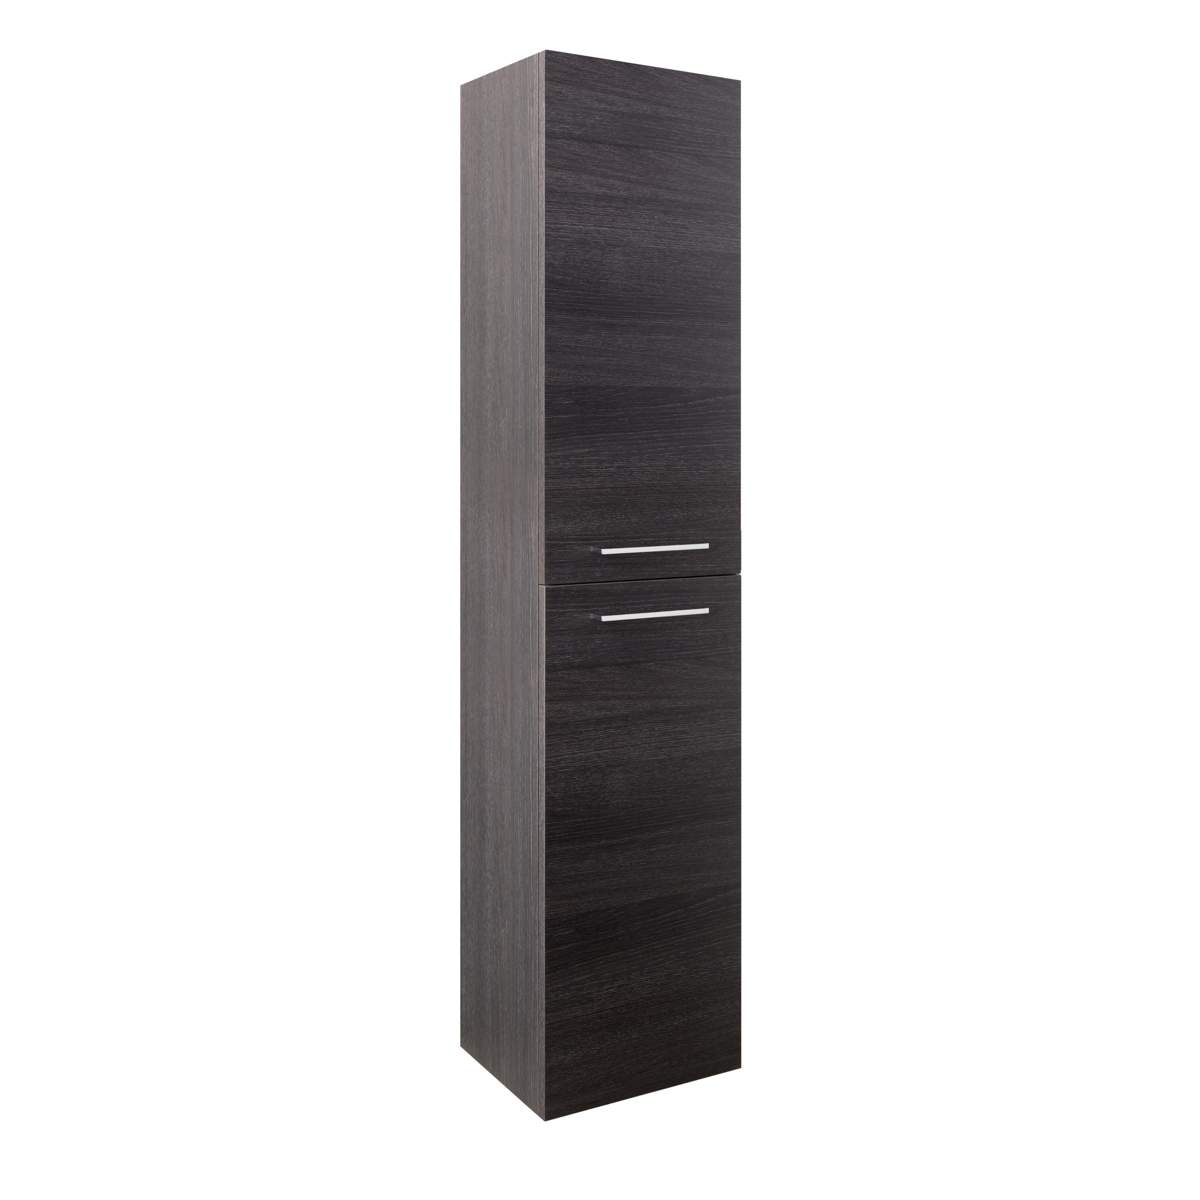 JTP Pace Units Double Door Side Cabinet in Black (WAL160BK)